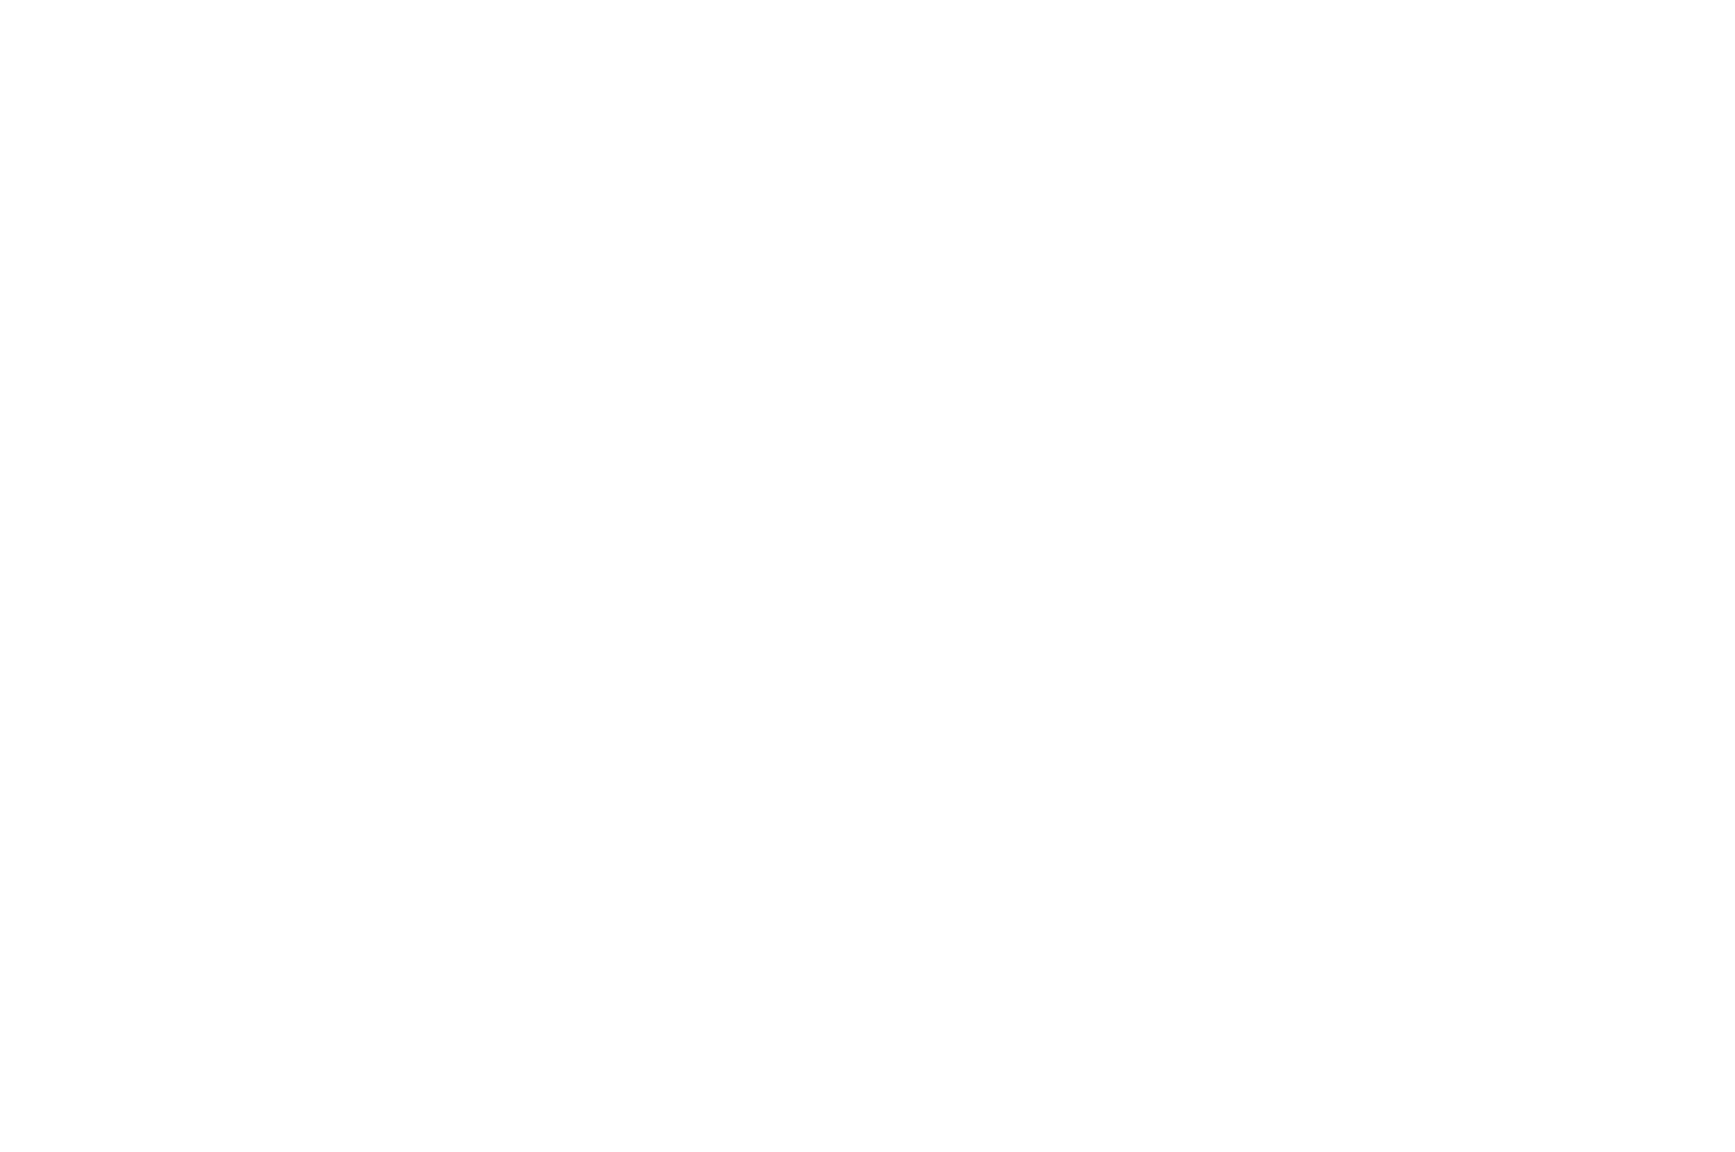 NOMINATED - BEST INTERNATIONAL SHORT FILM - MOVE ME PRODUCTIONS OIFF 2016 (1).png